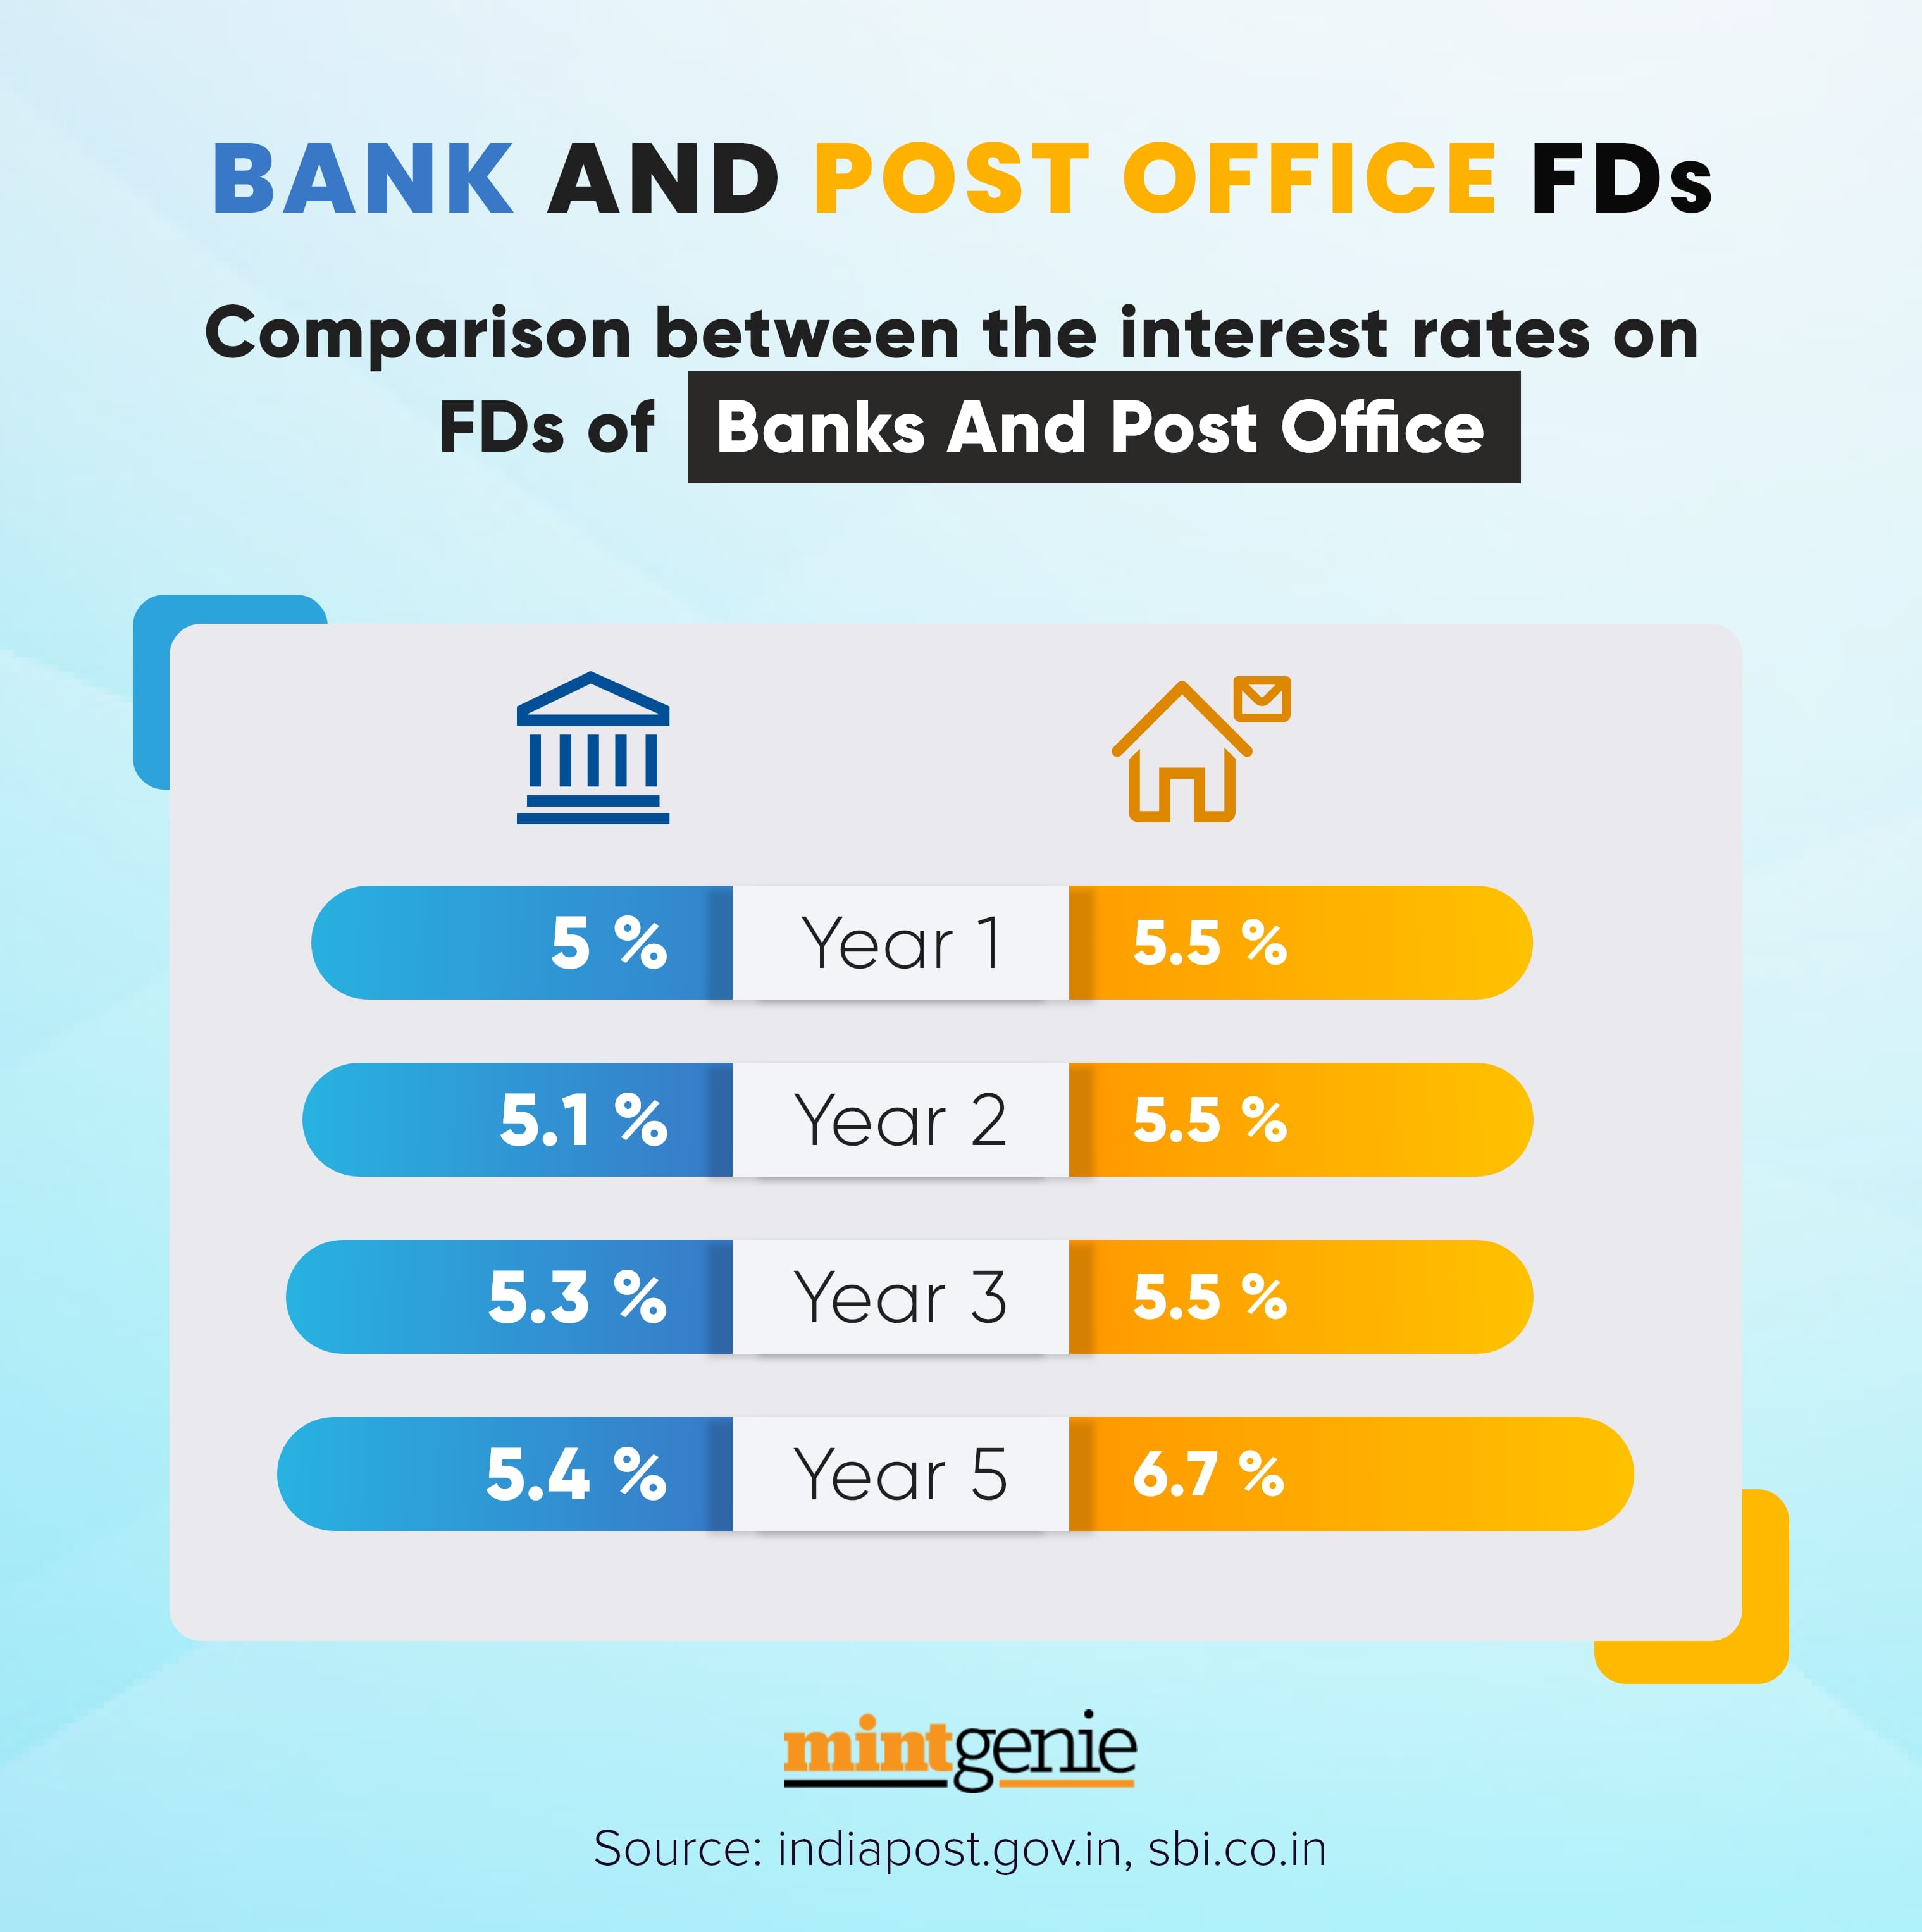 We explain here interest rates on FDs of banks and post offices.